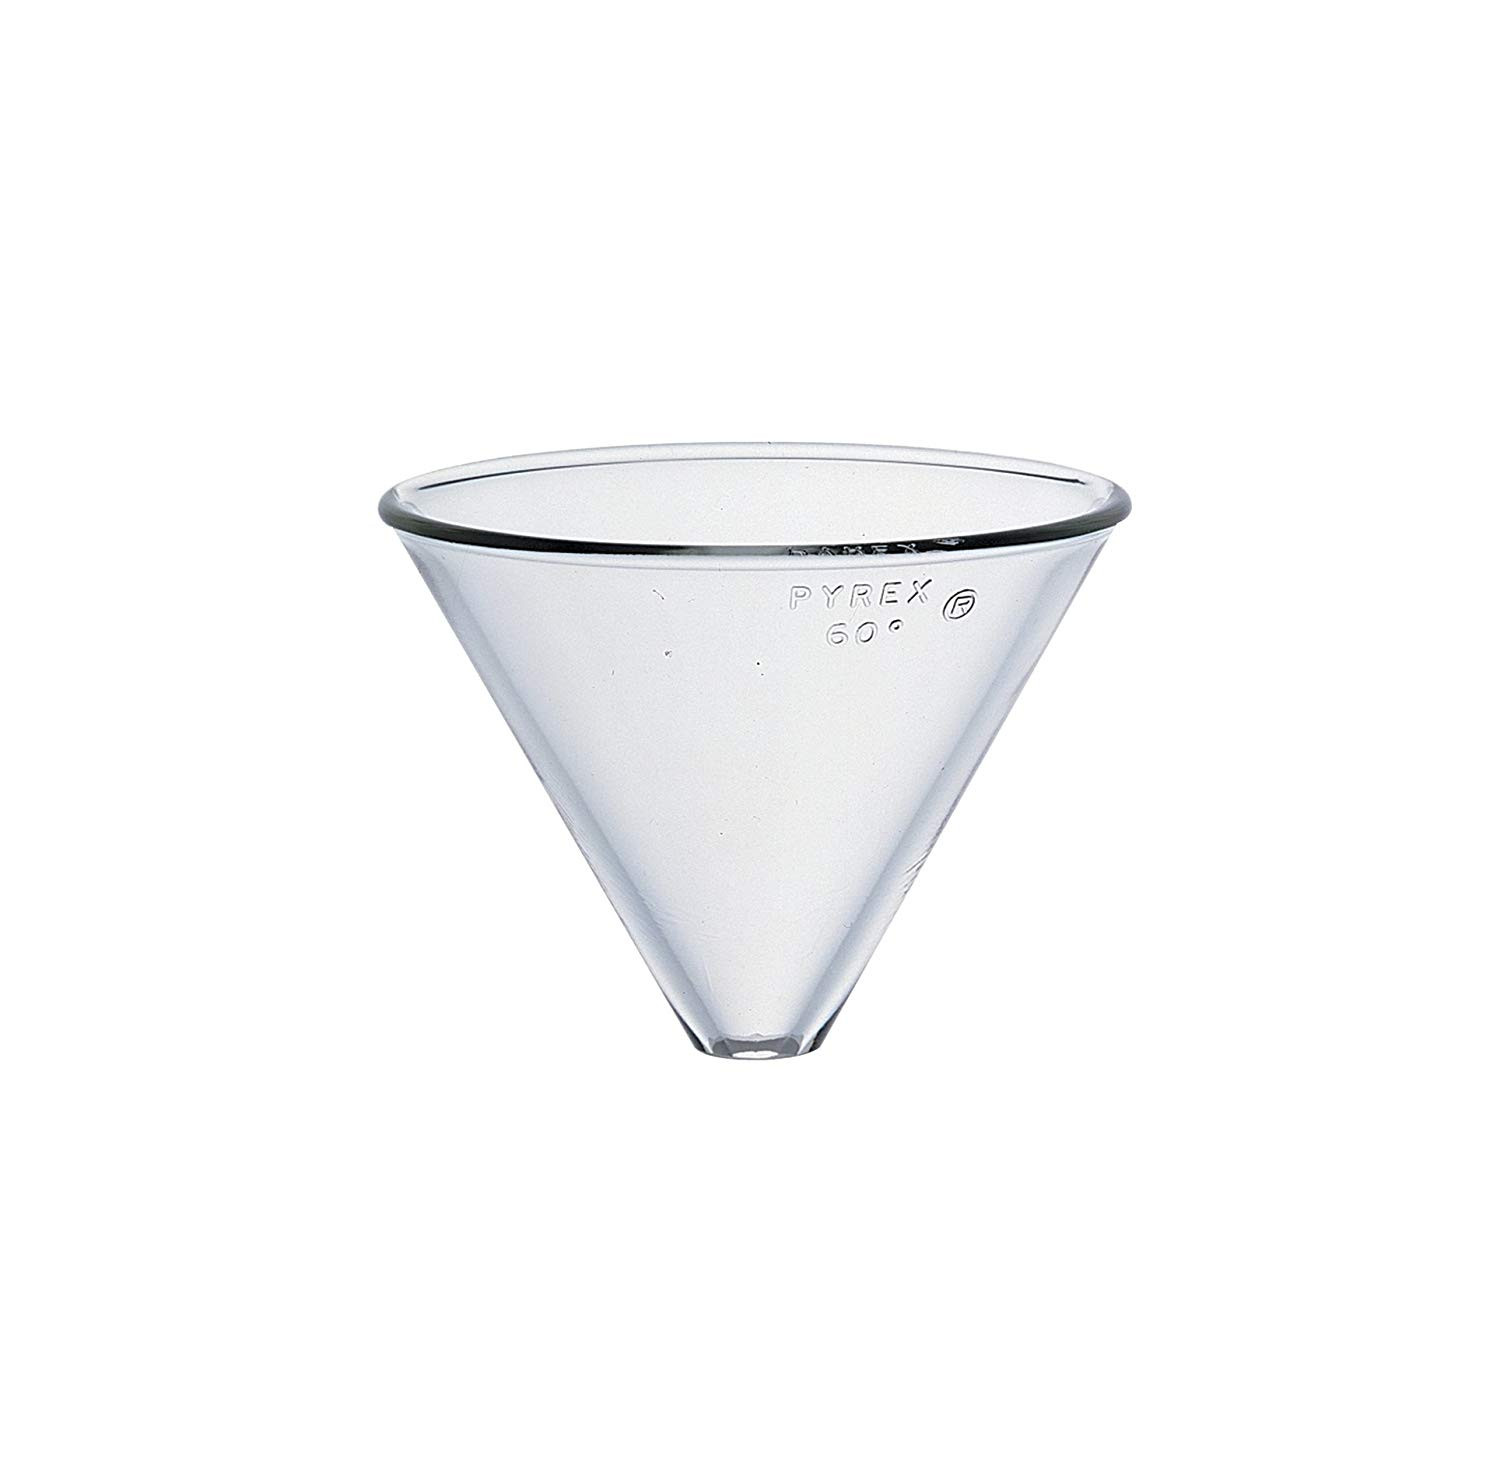 16 attractive 16 Inch Glass Vase 2024 free download 16 inch glass vase of corning pyrex borosilicate glass plain stemless funnel 100mm top pertaining to corning pyrex borosilicate glass plain stemless funnel 100mm top i d science lab funnels 